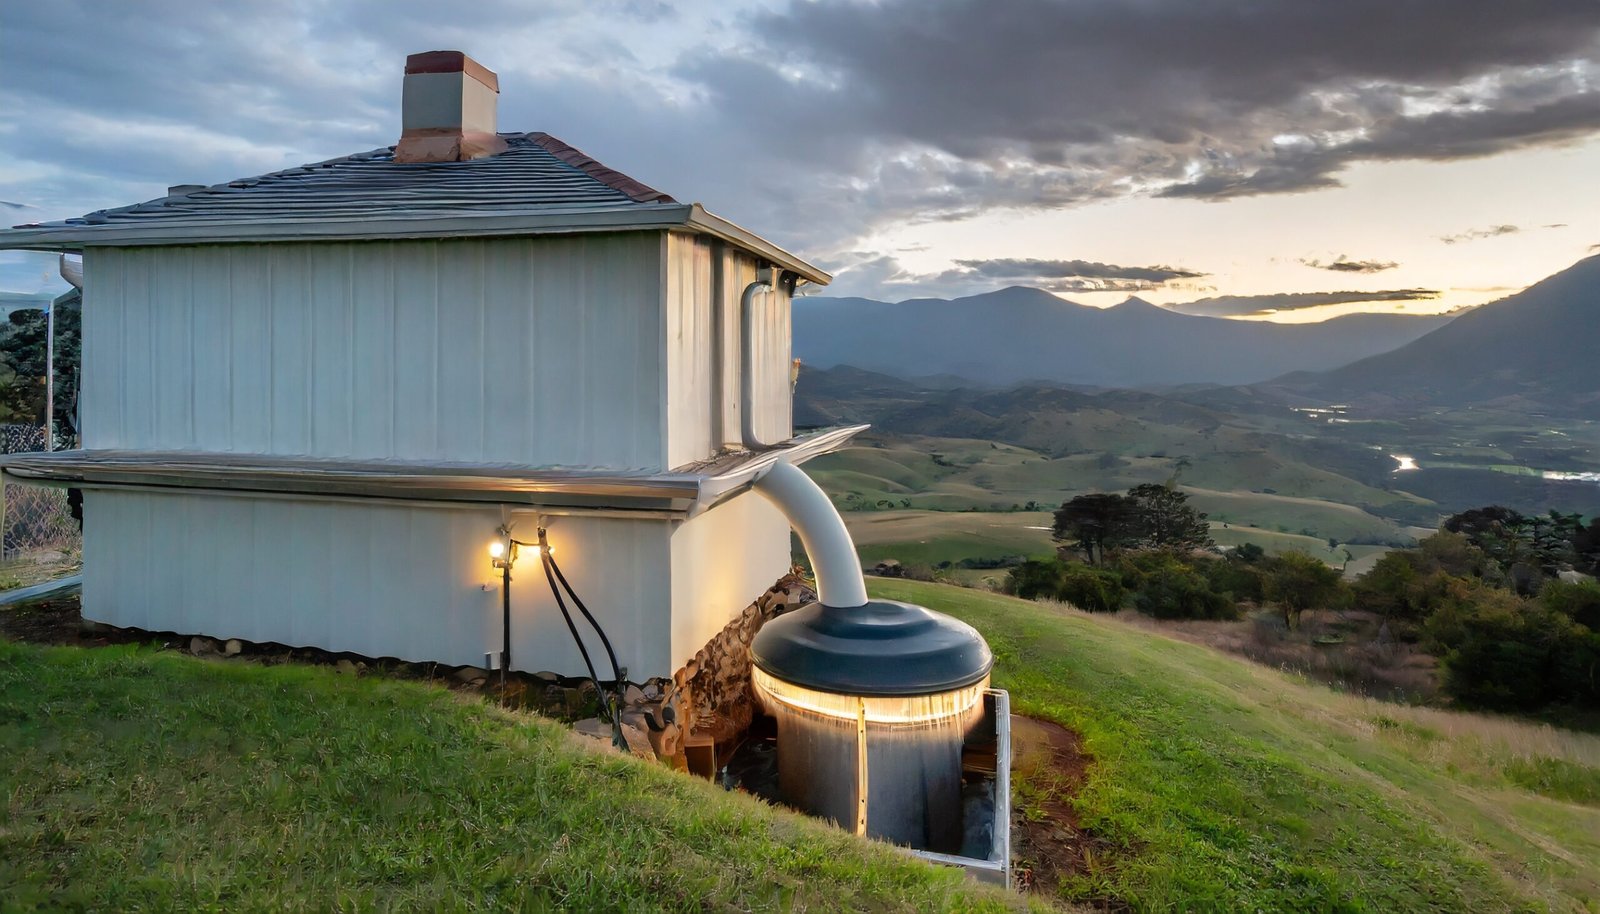 House with a rain water harvesting system with hills and mountain in the distance 